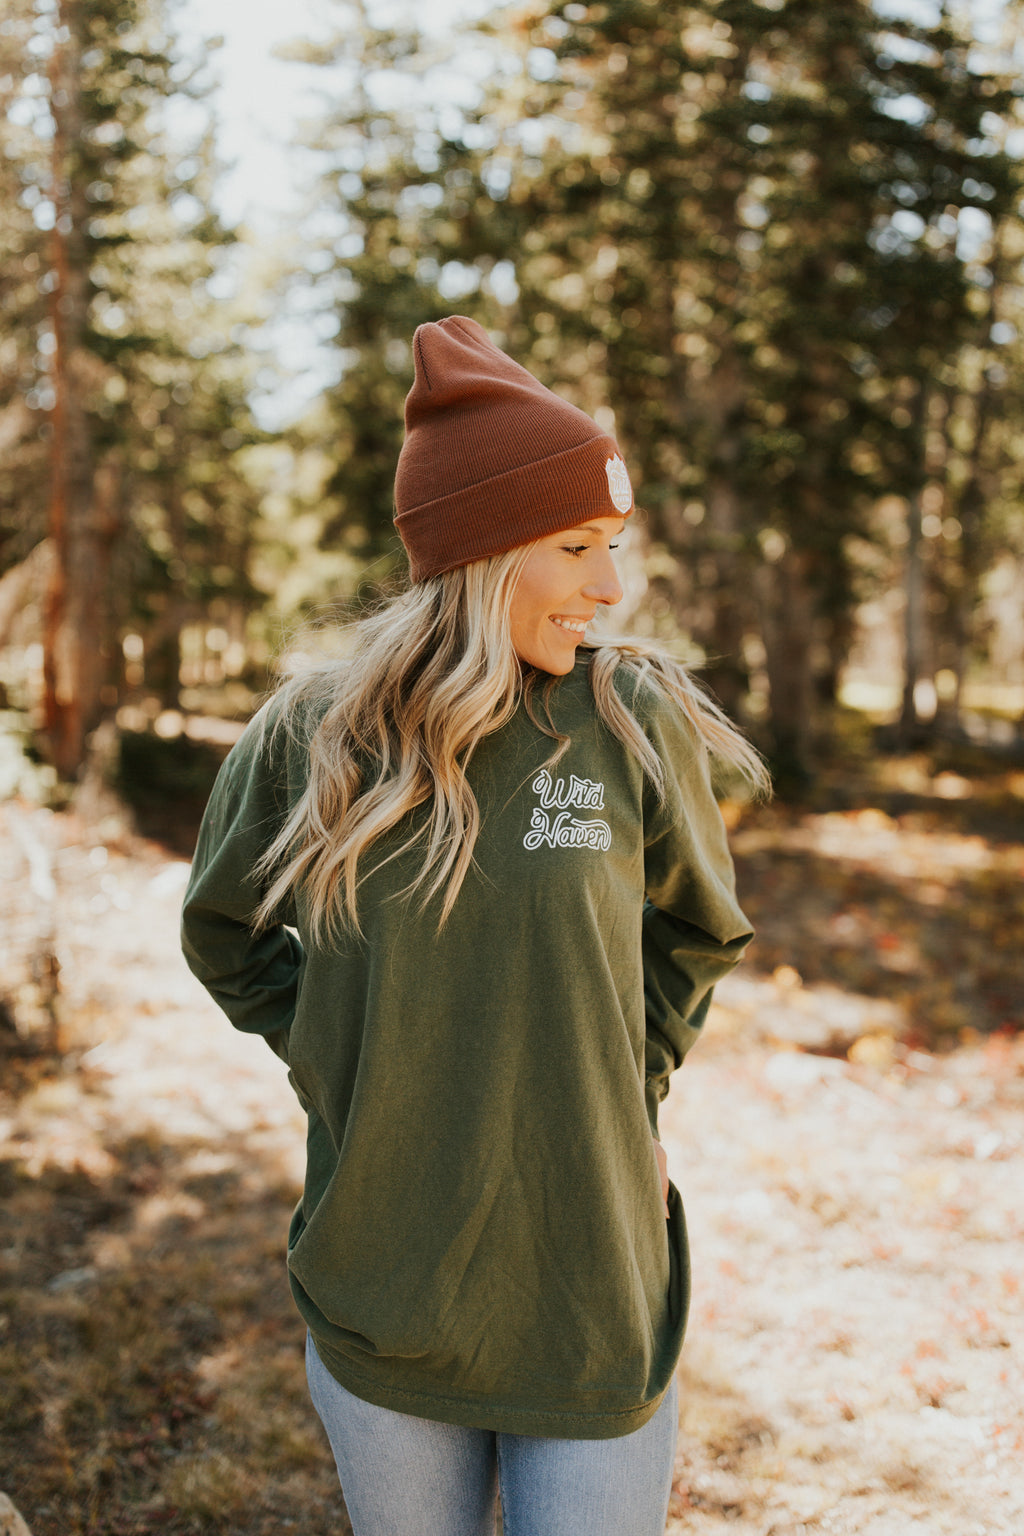 Hemp Long Sleeve "Find Your Haven" T-Shirt